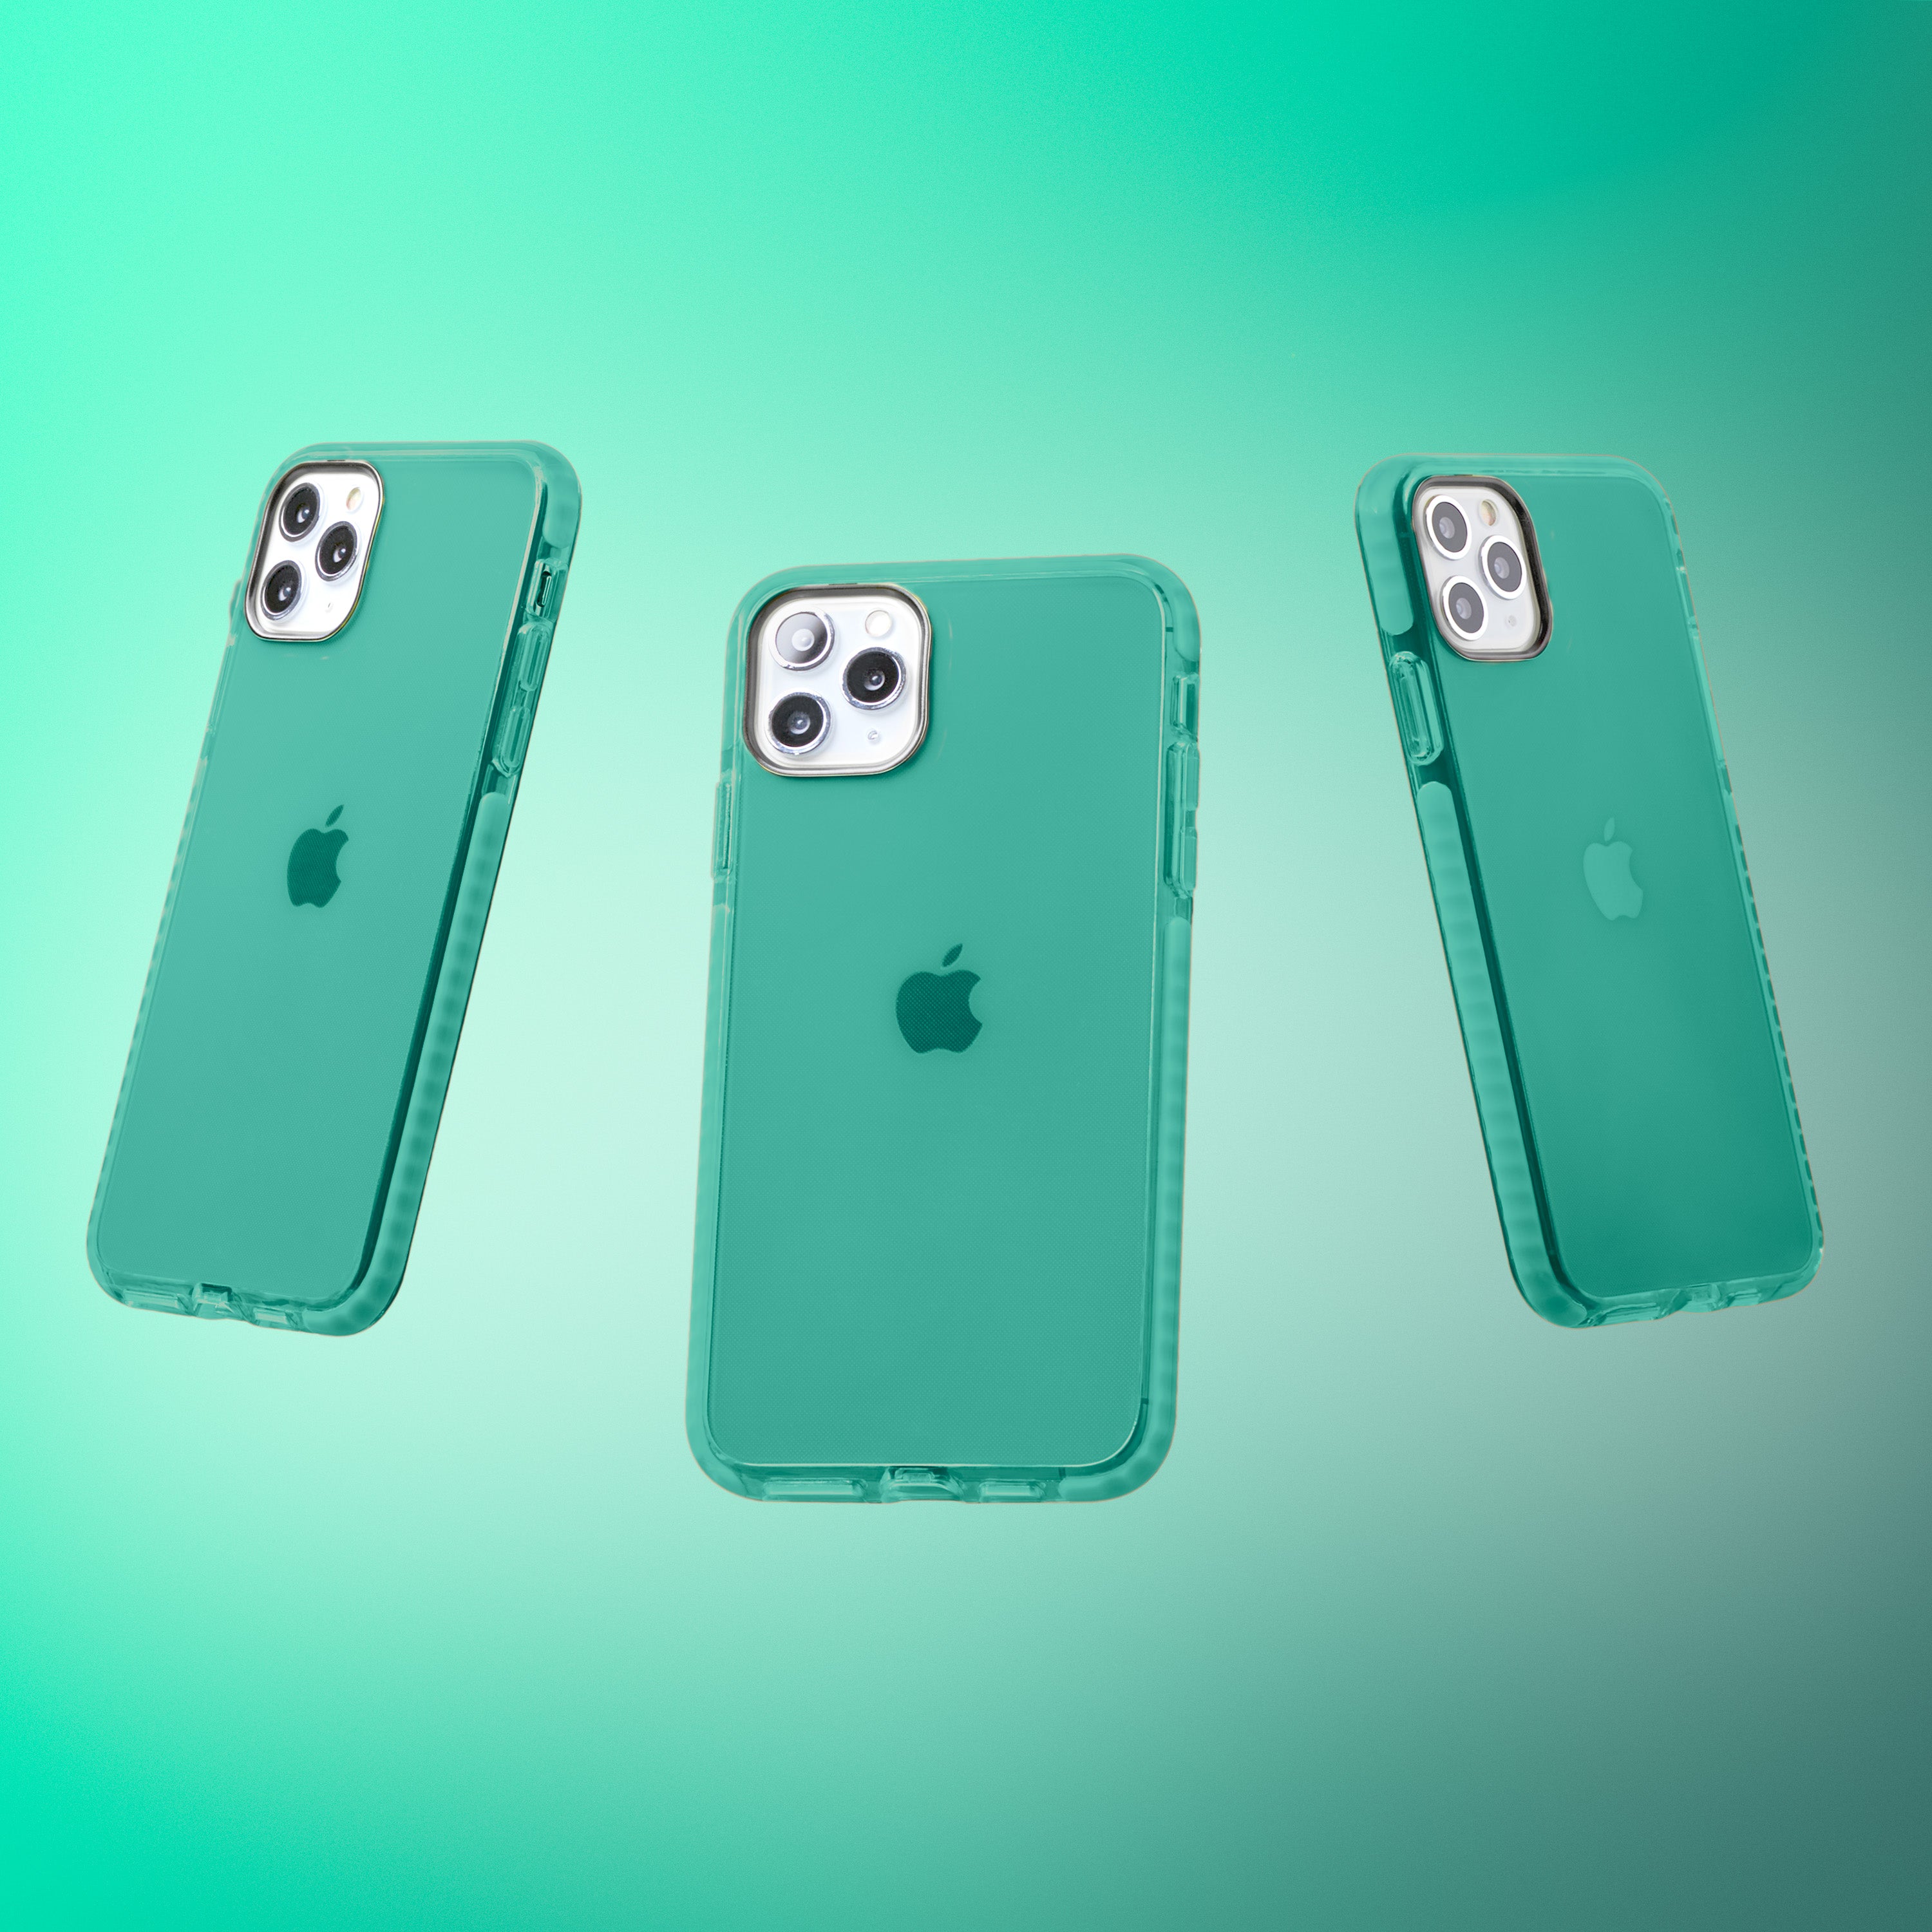 Barrier Case for iPhone 11 Pro Max - Polished Turquoise Blue